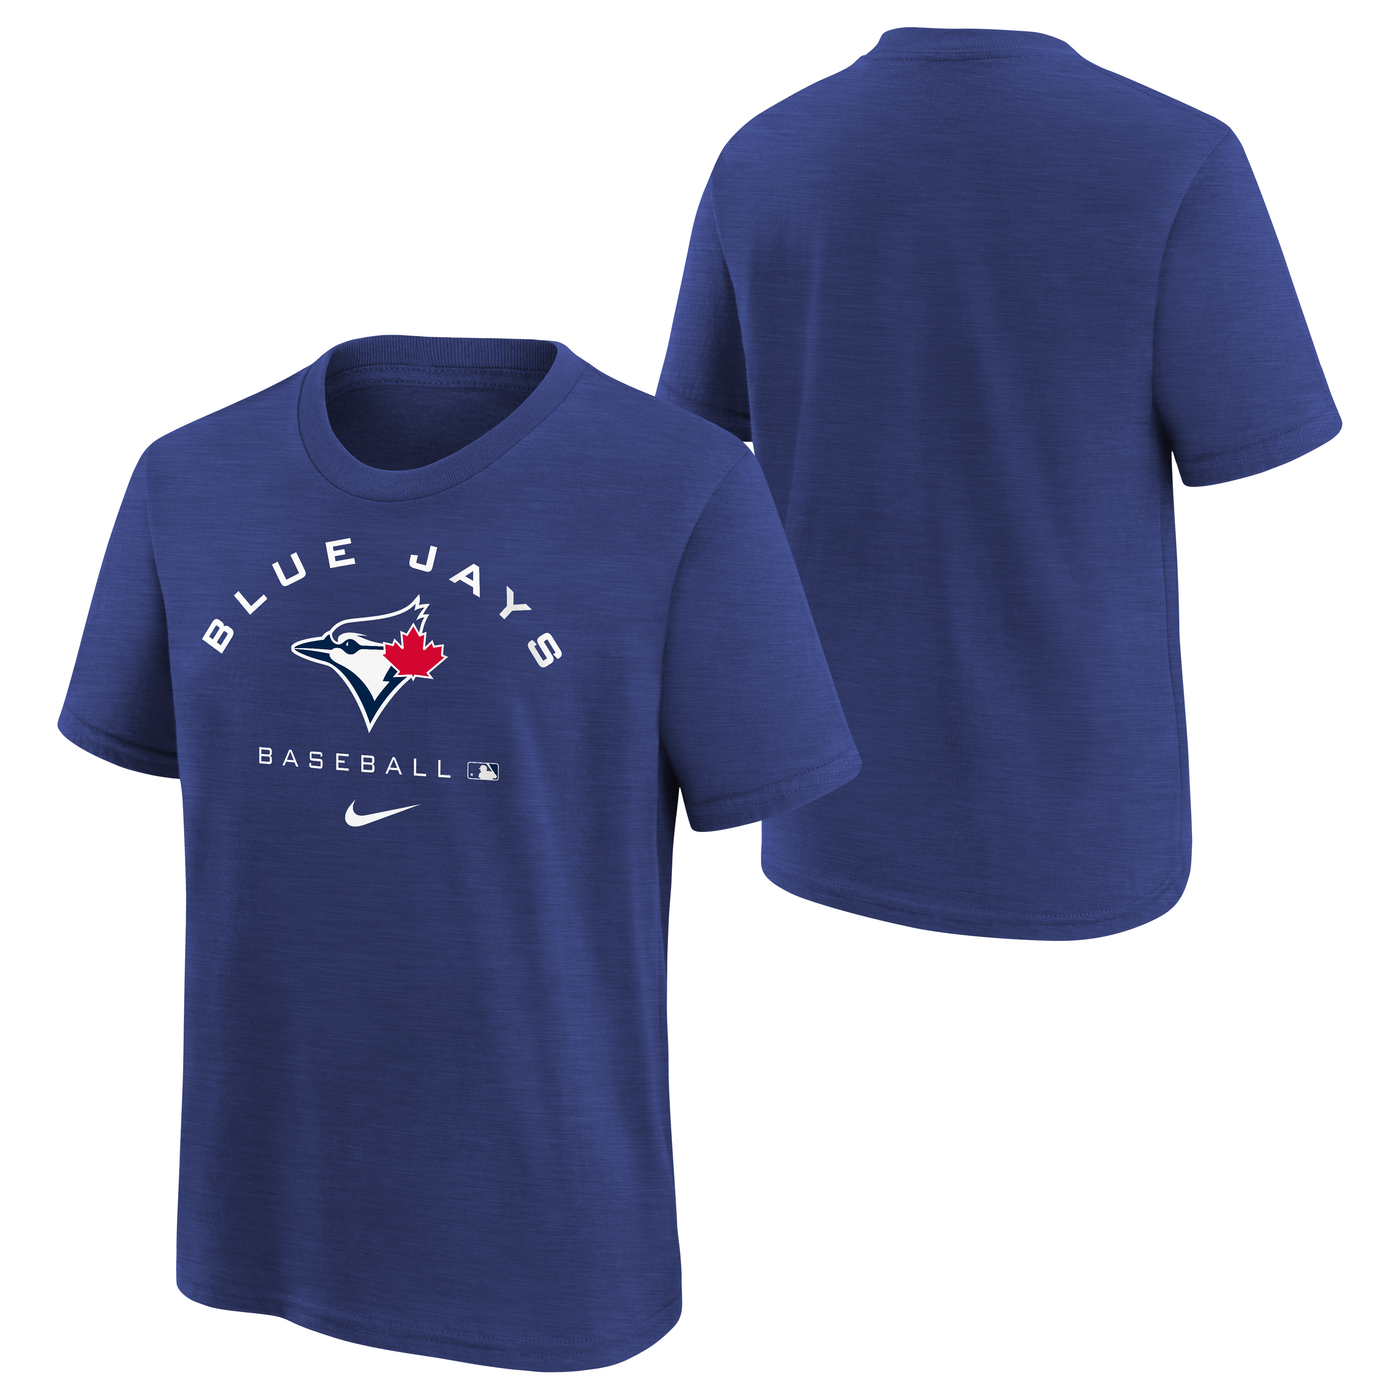 Your Captain Says Vote Captain Kirk Toronto Blue Jays All-Star Shirt,  hoodie, sweater, long sleeve and tank top